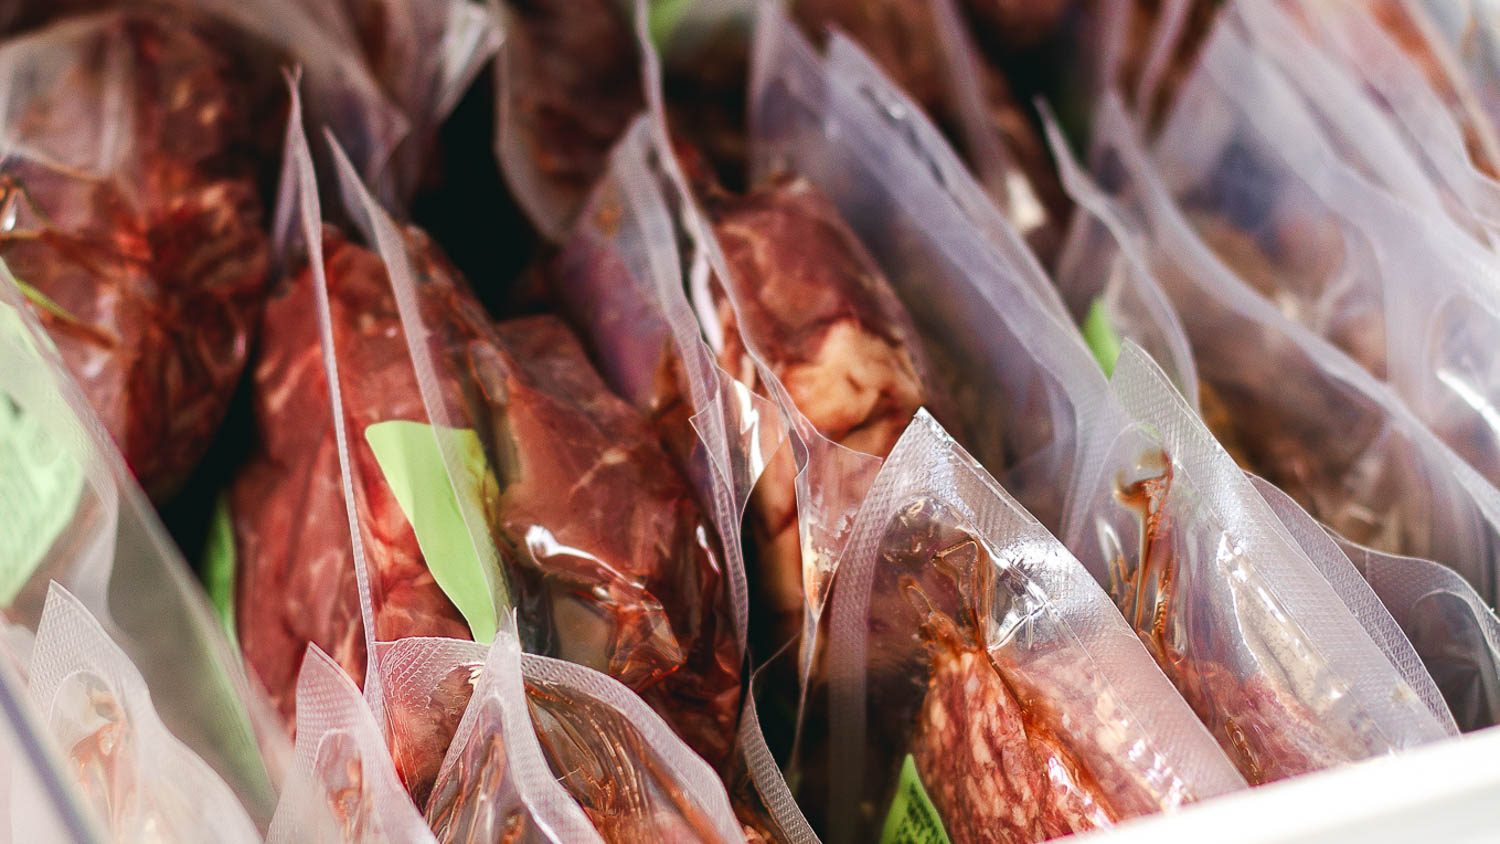 The Benefits of Vacuum Sealing for Long-Term Food Storage - Fresh